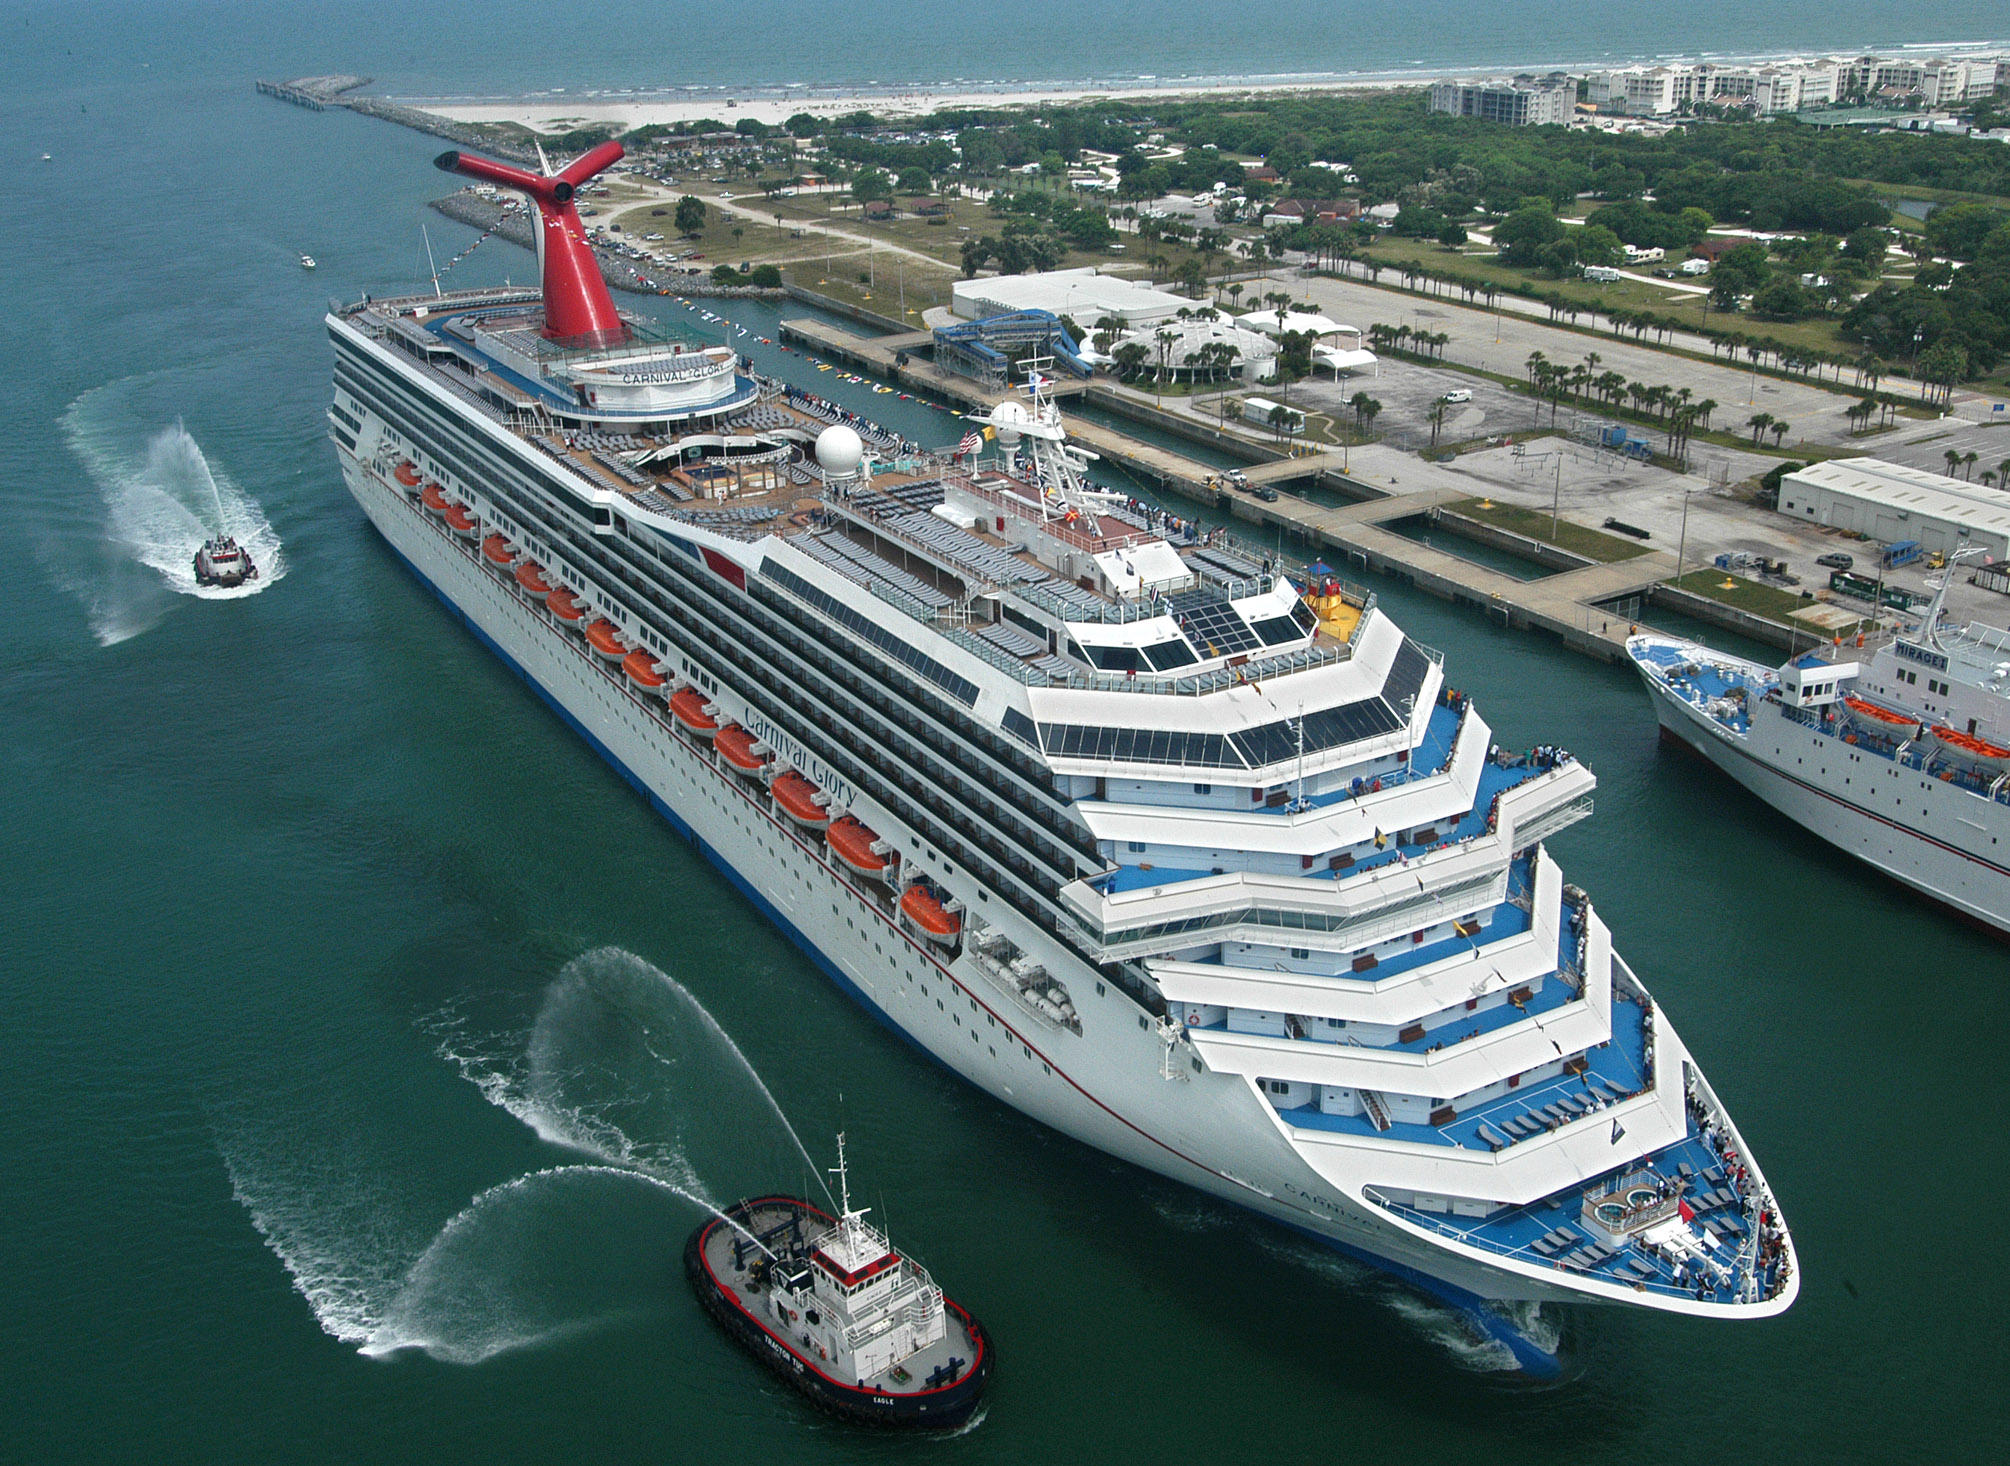 8yearold girl dies after falling from Carnival cruise ship deck CBS